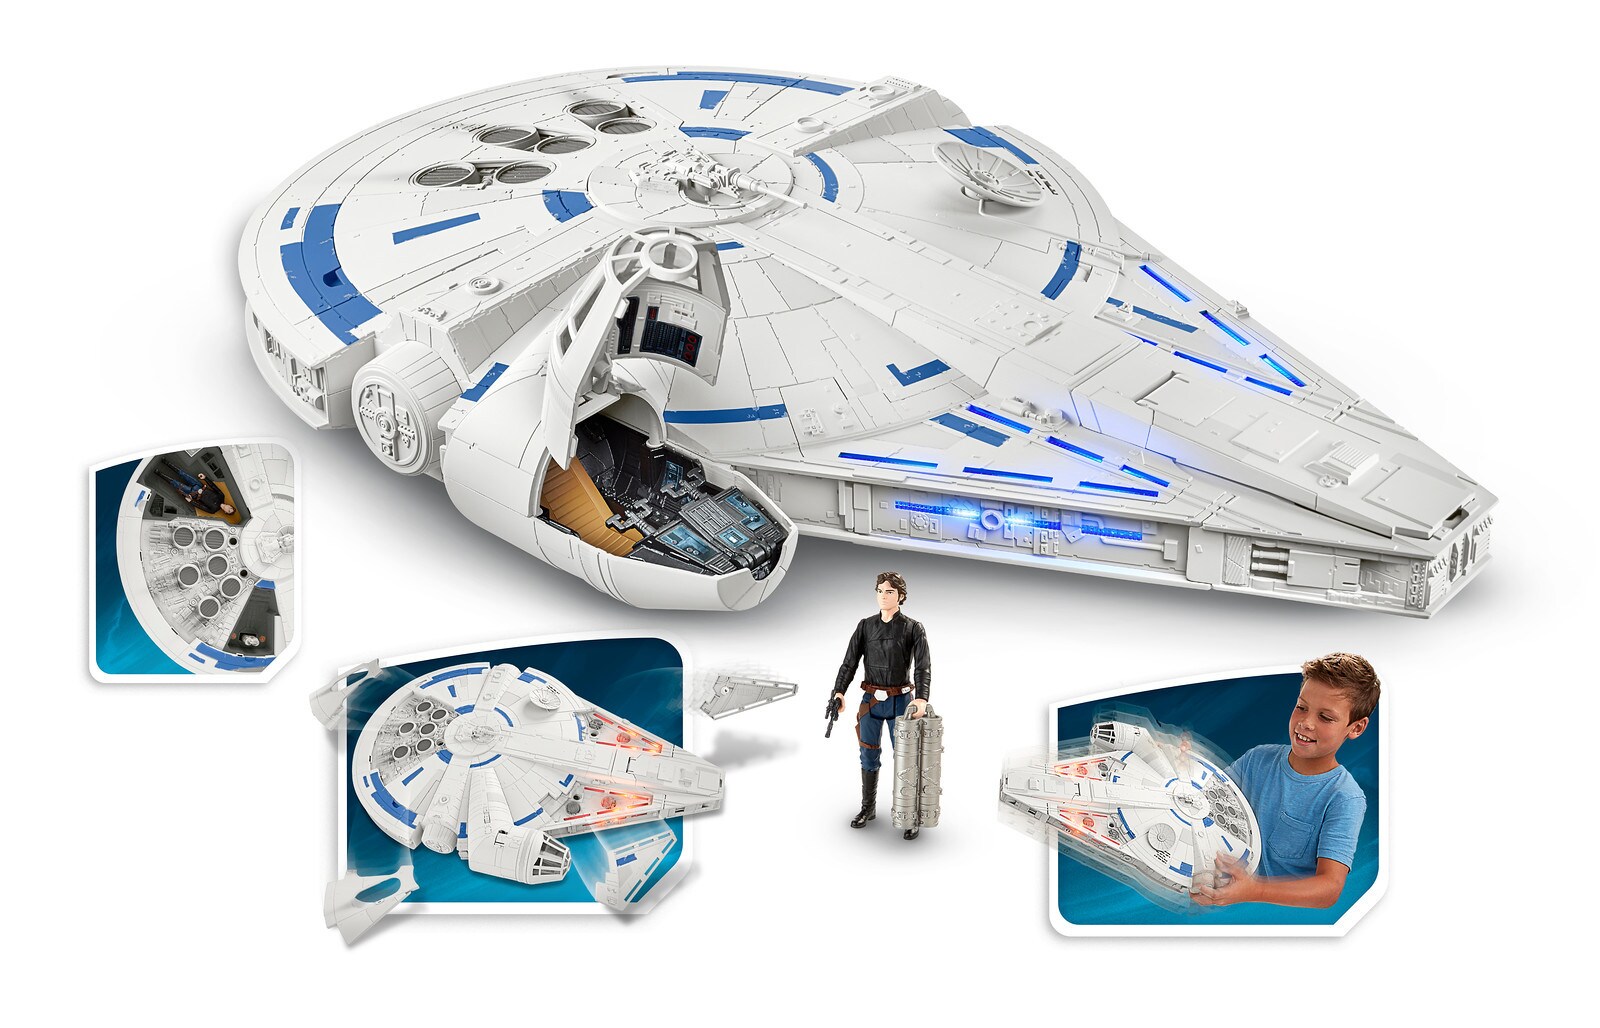 A Millennium Falcon toy with hidden compartments and a Han Solo figurine.